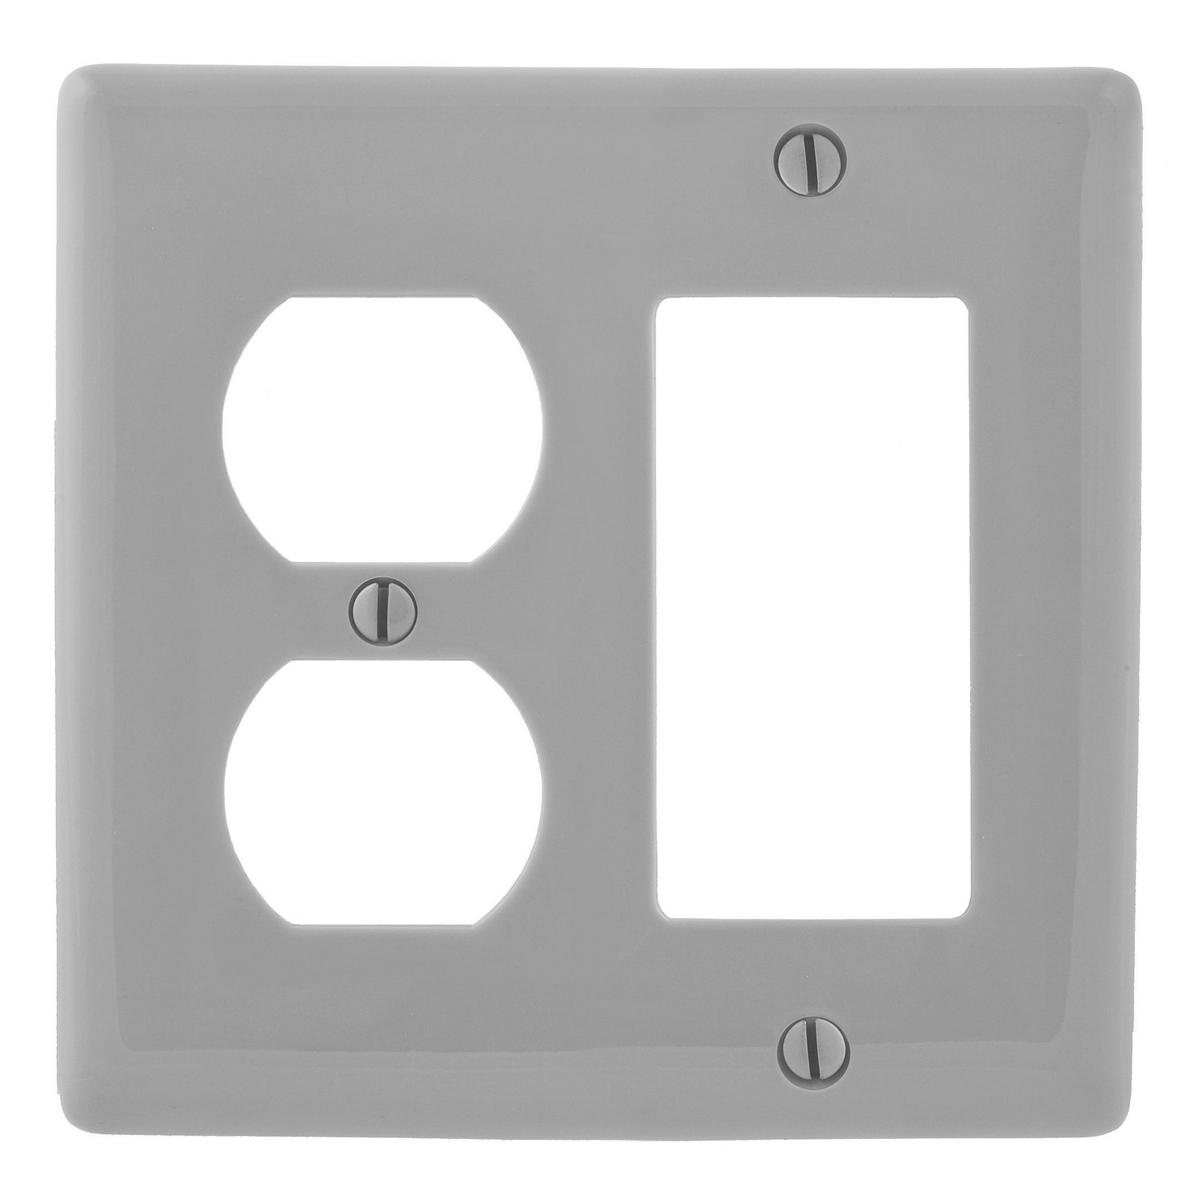 Hubbell NPJ826GY Wallplates, Nylon, Mid-Sized, 1-Gang, 1) Duplex, 1) Decorator, Gray  ; Reinforcement ribs for extra strength ; High-impact, self-extinguishing nylon material ; Captive screw feature holds mounting screw in place ; Standard Size is 1/8" larger to give you 